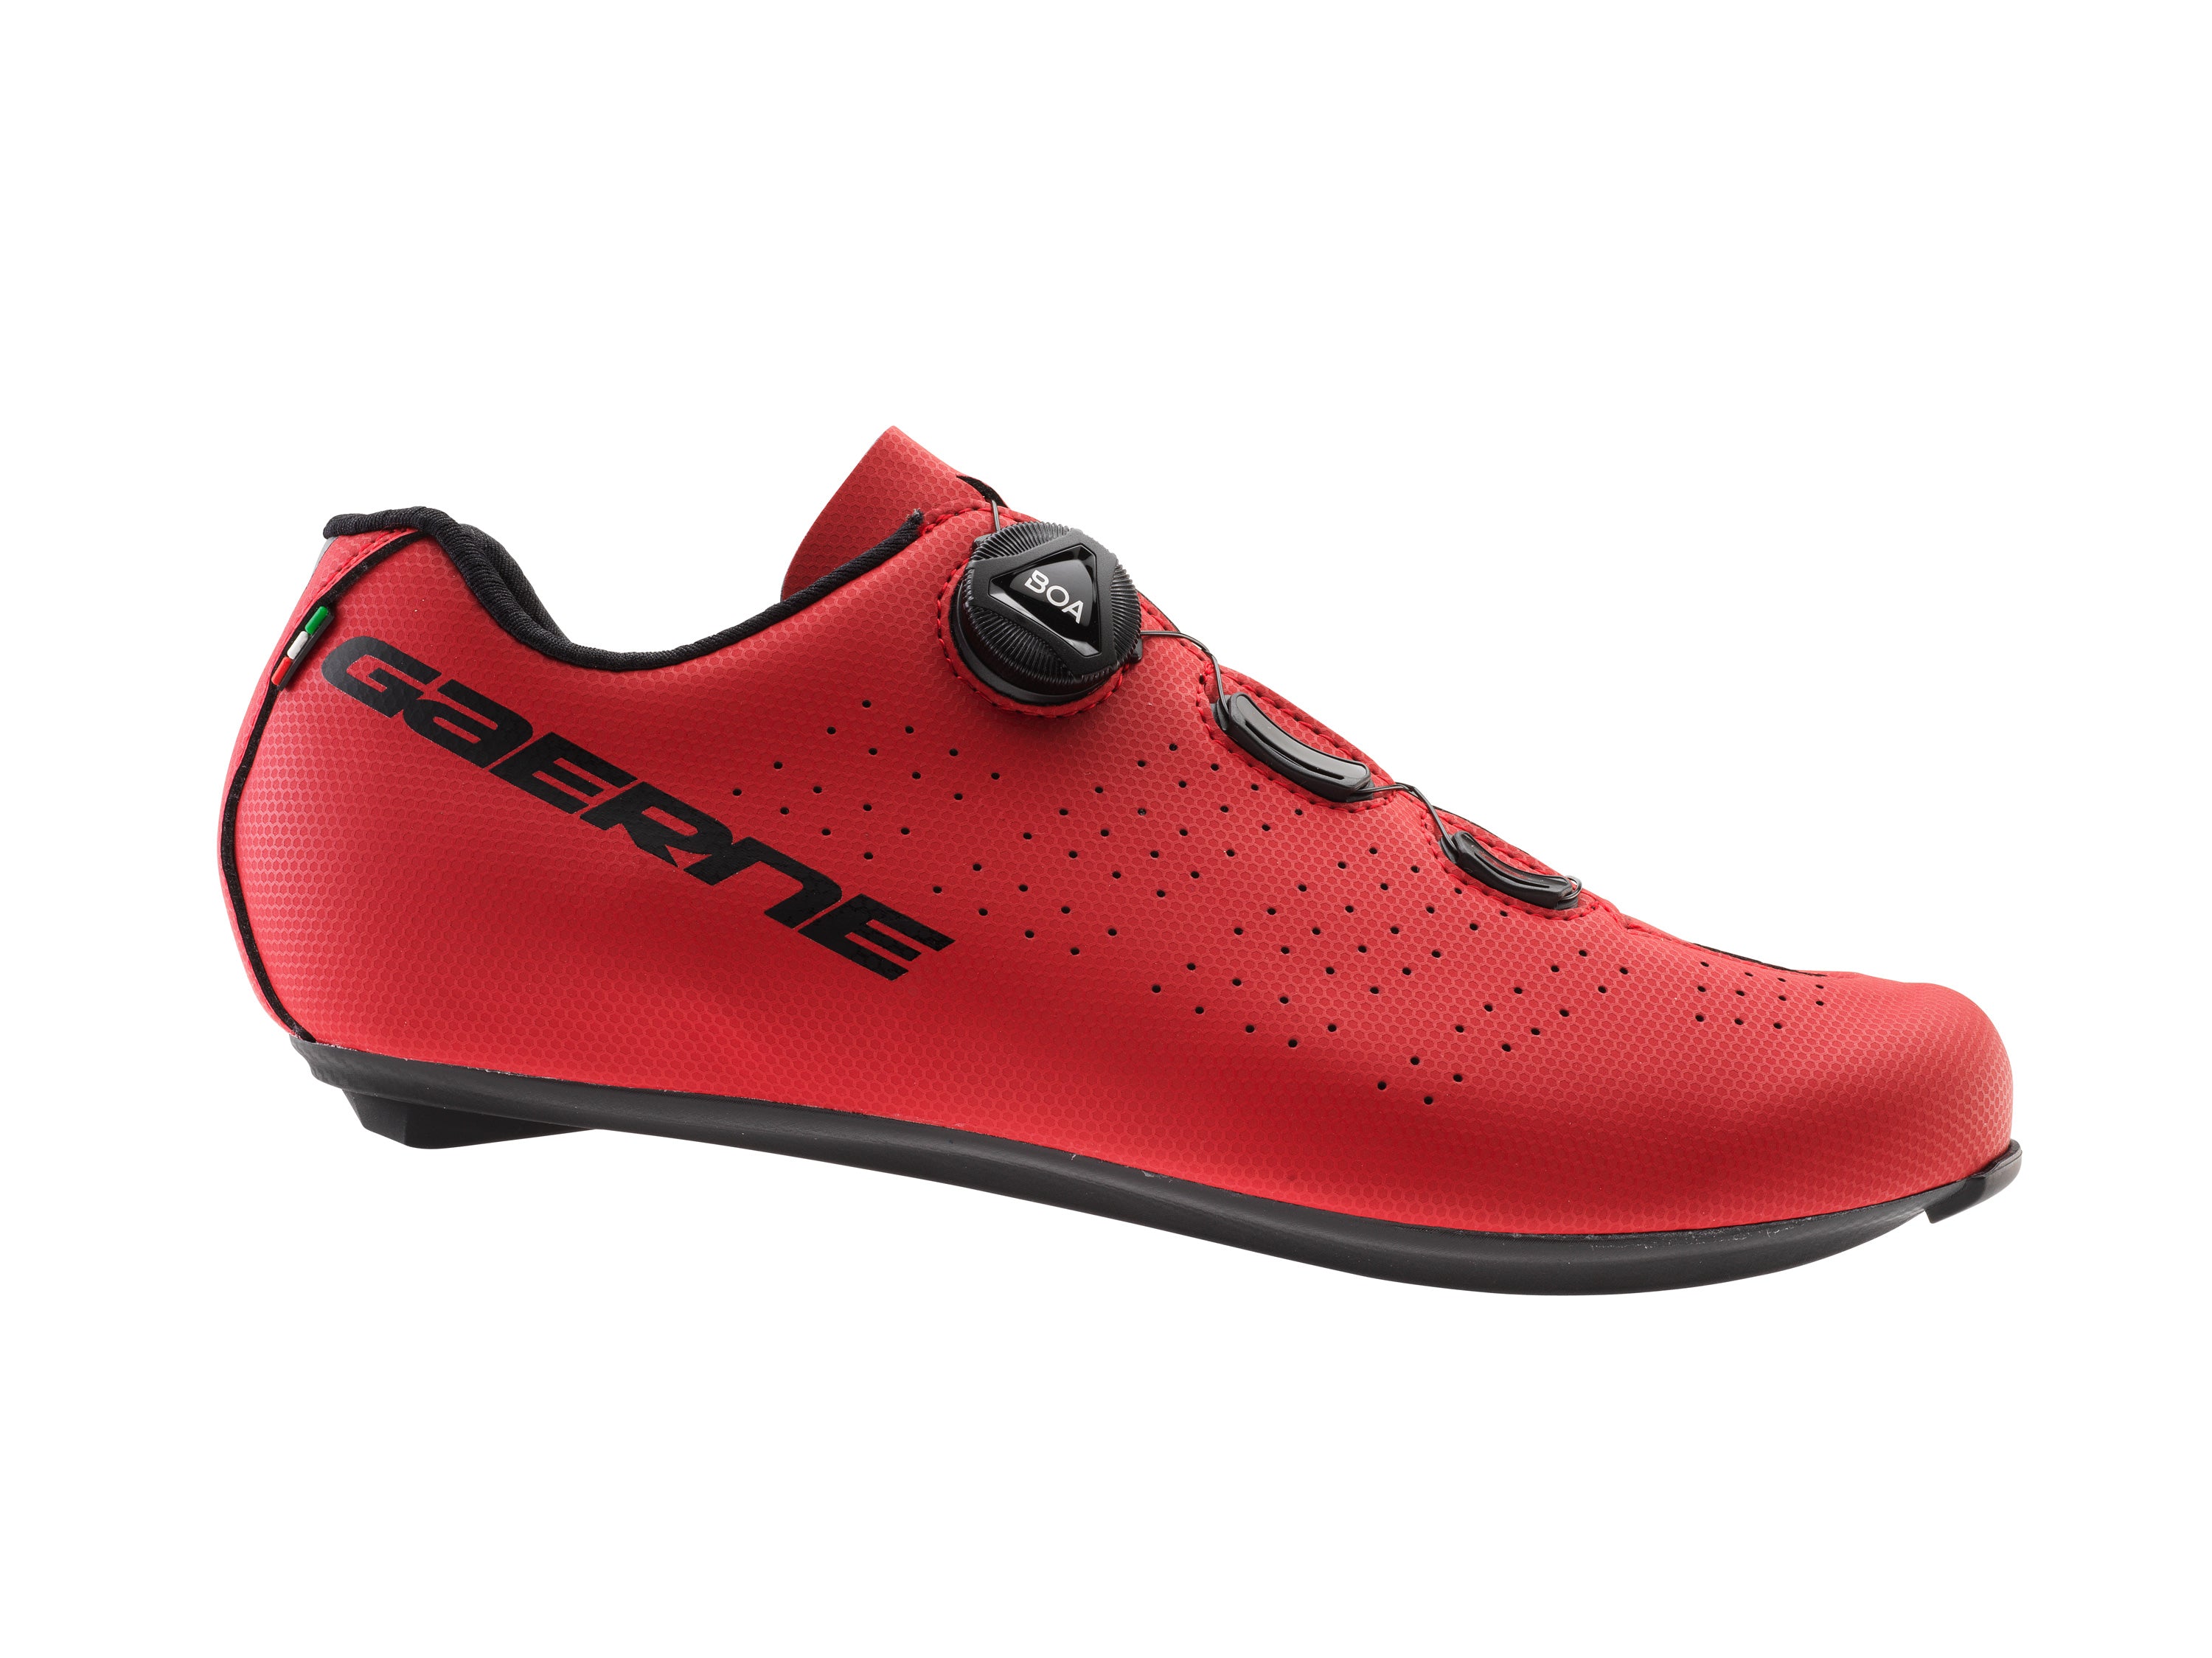 GAERNE G. SPRINT Cycling Road Shoes - Red 3654-005 (SALE)